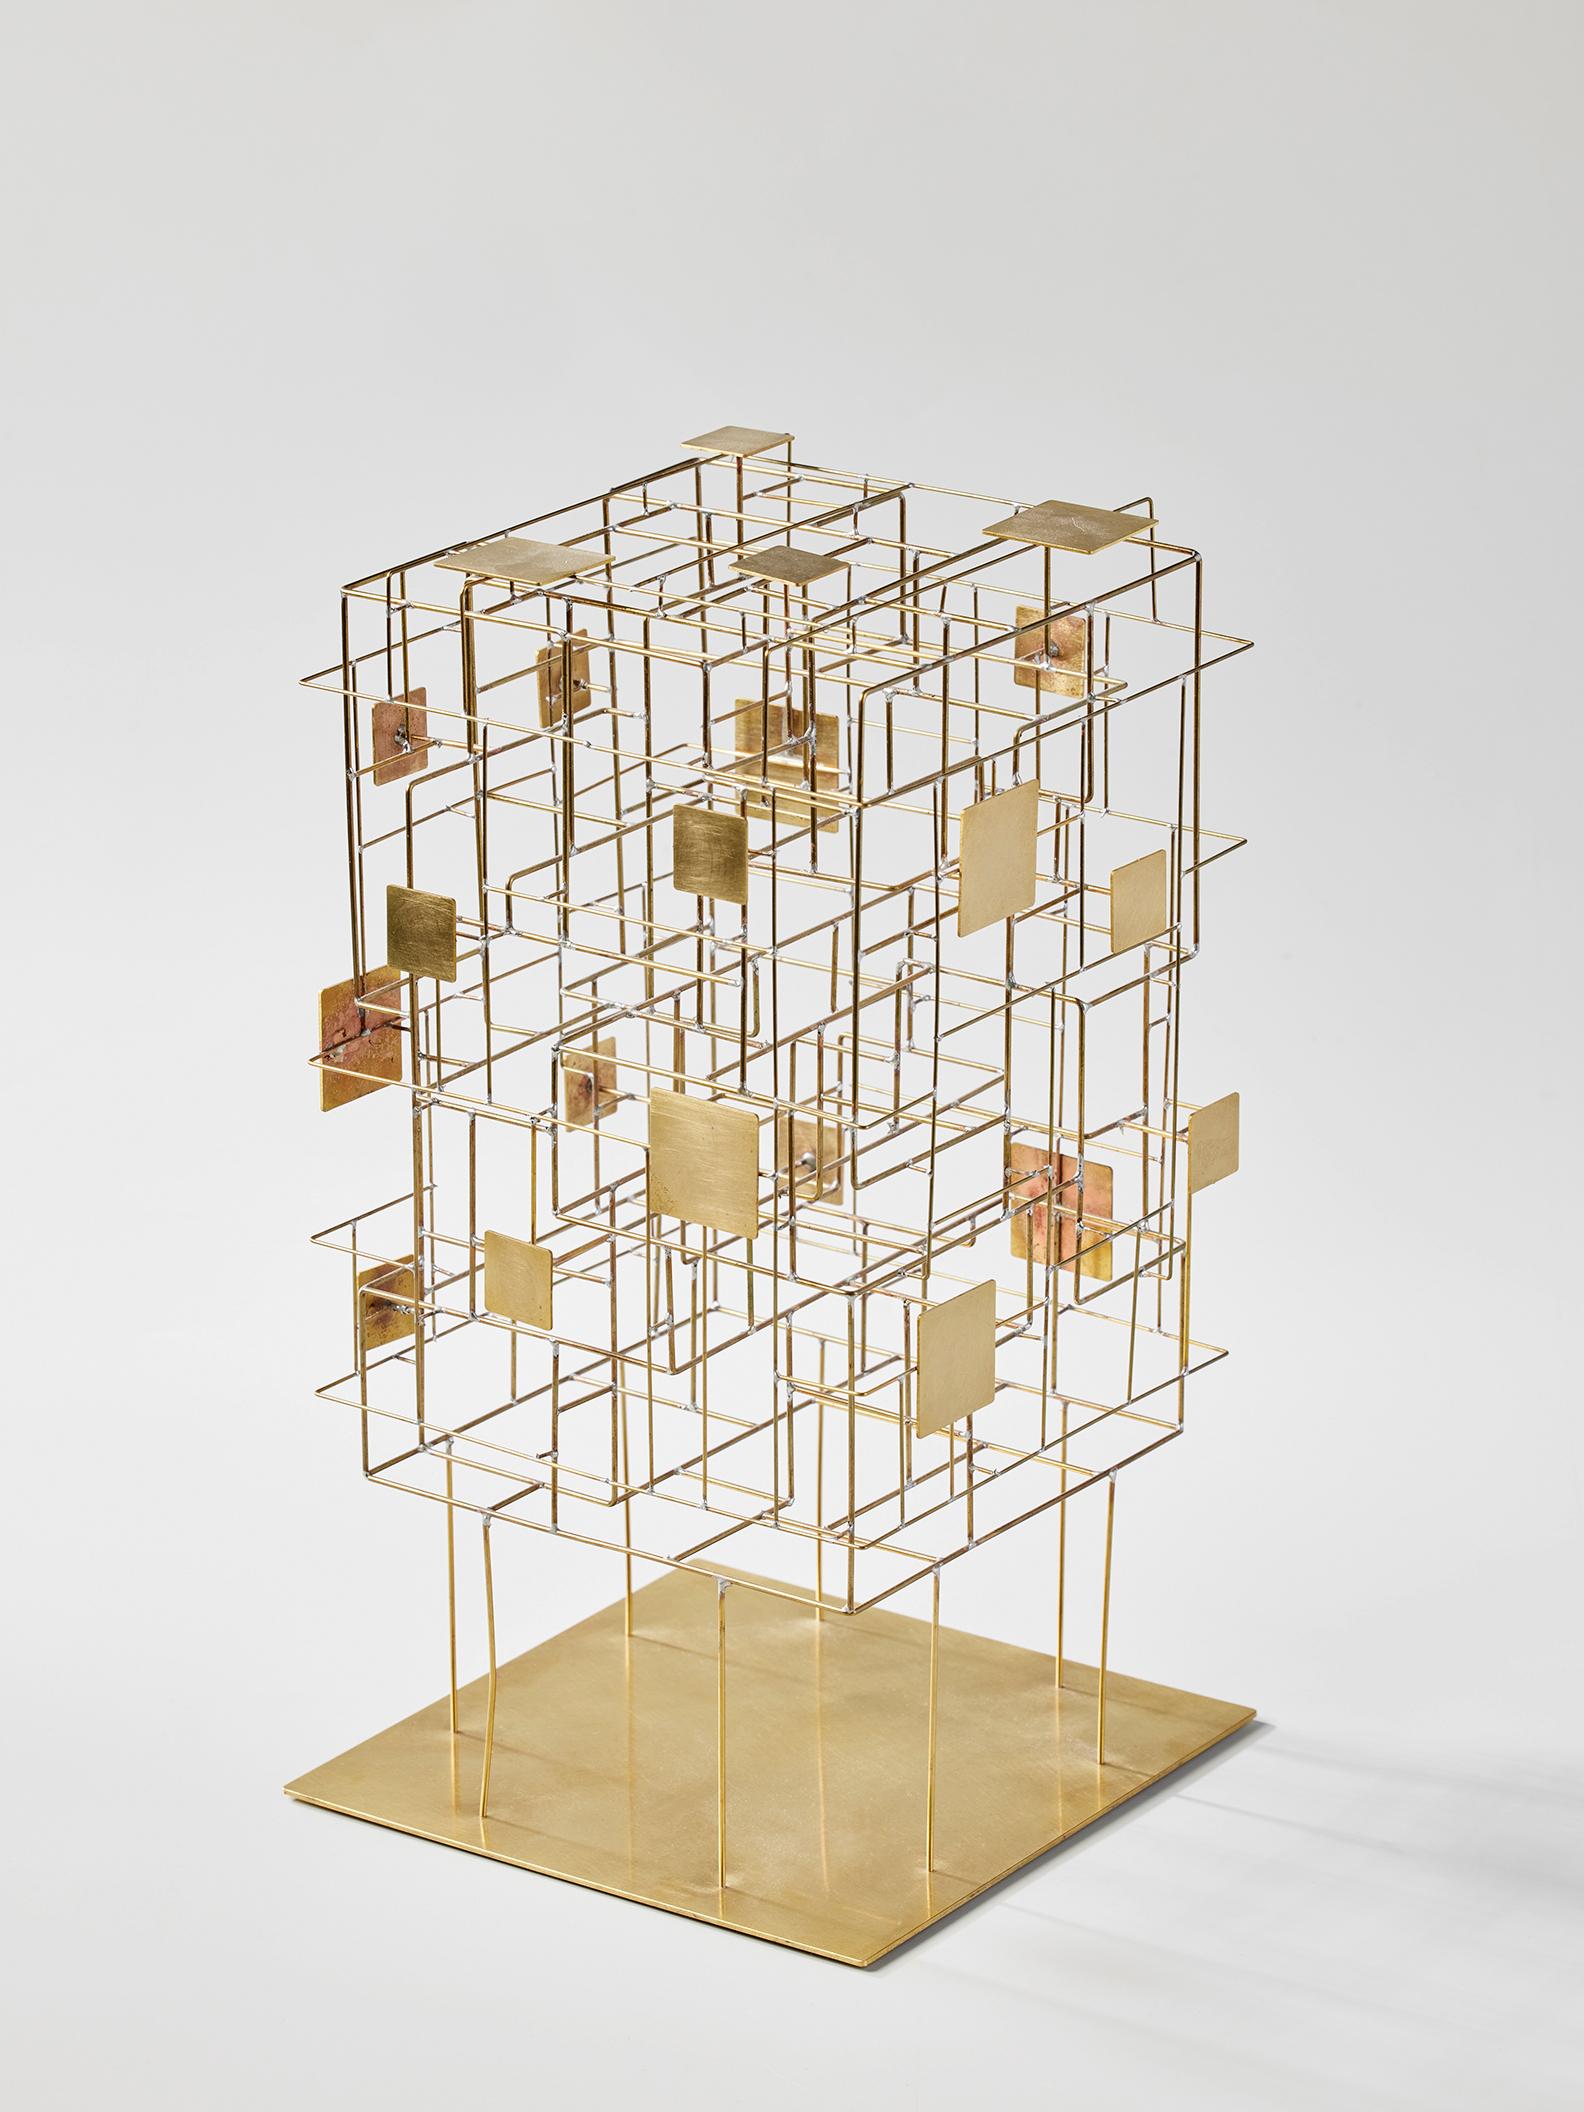 Cubique was created in 2021 by French designer Eric de Dormael. Handcrafted in brass, this is a unique piece.
Éric de Dormael is an unconventional artist, his trajectory far from the beaten track. Trained at the Saint-Luc school in Tournai and at